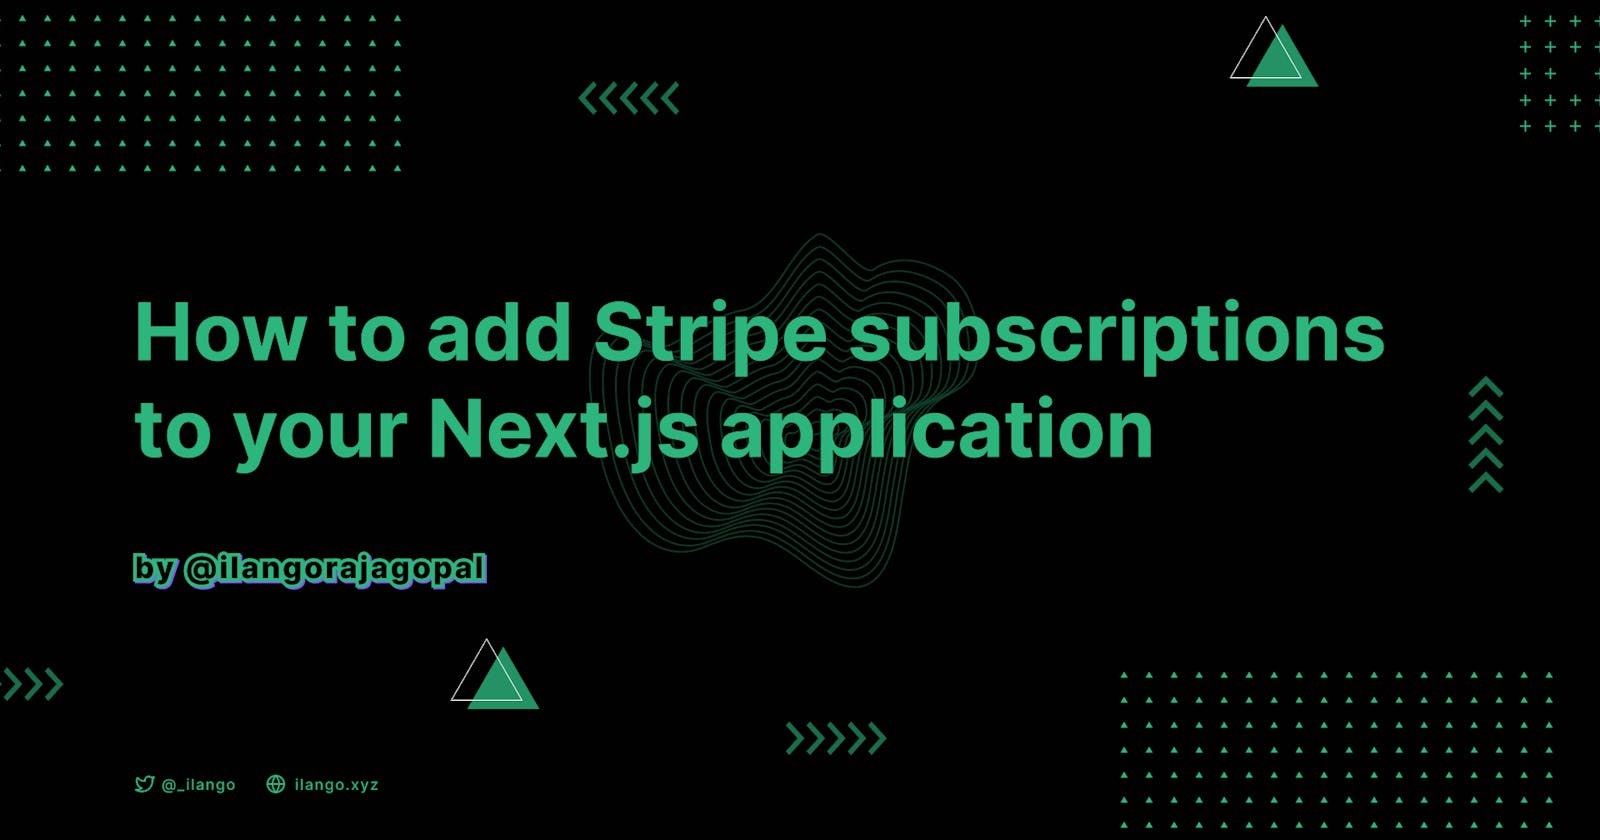 How to add Stripe subscriptions to your Next.js application